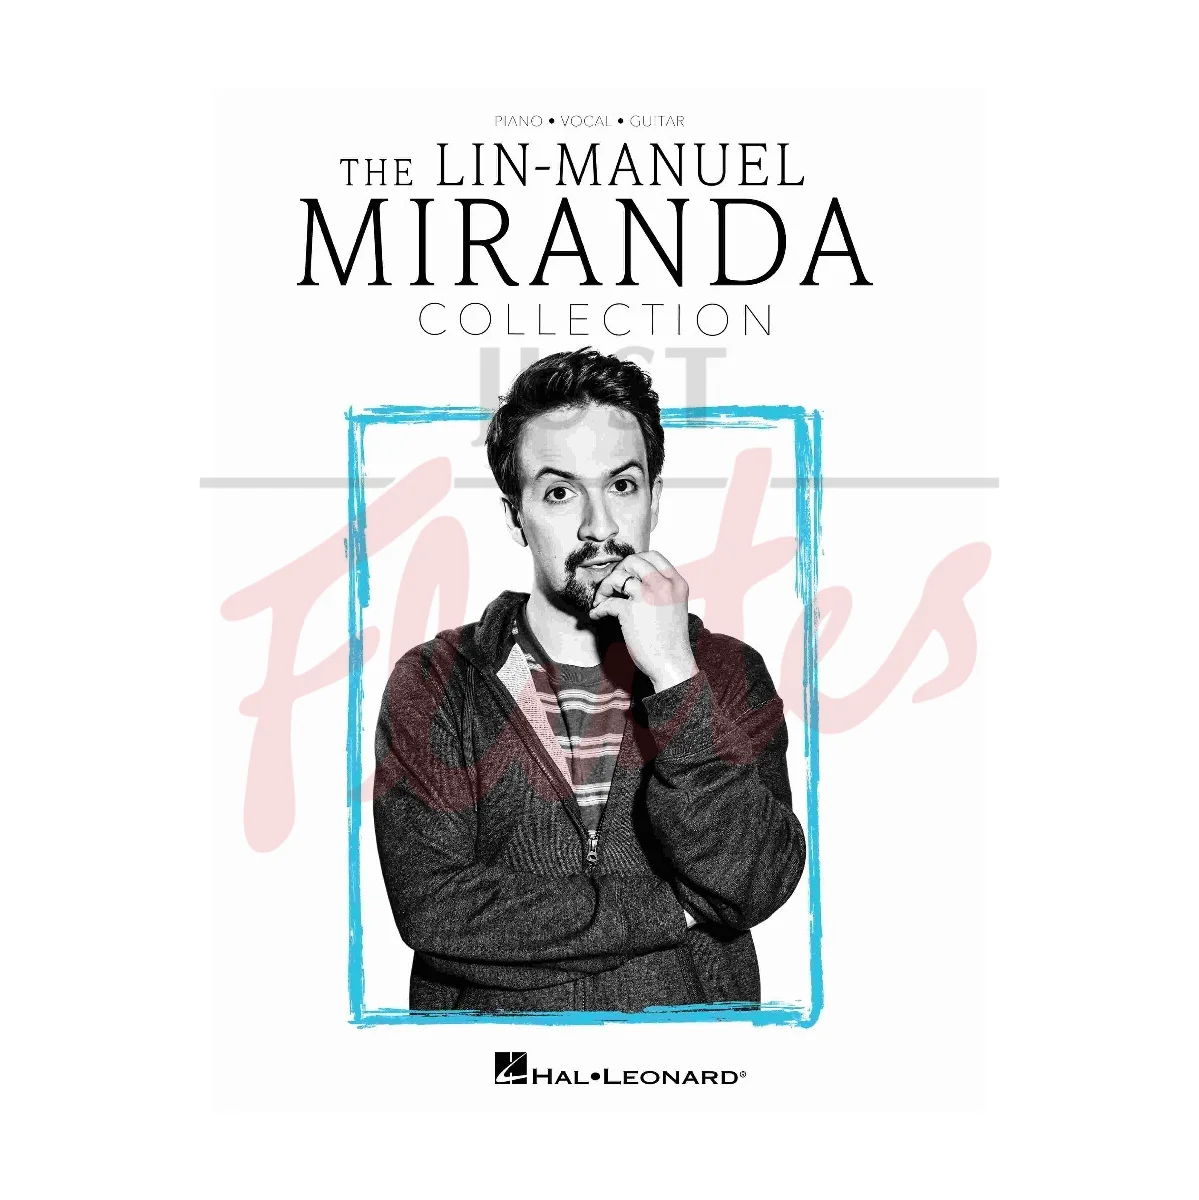 The Lin-Manuel Miranda Collection for Piano, Vocals and Guitar